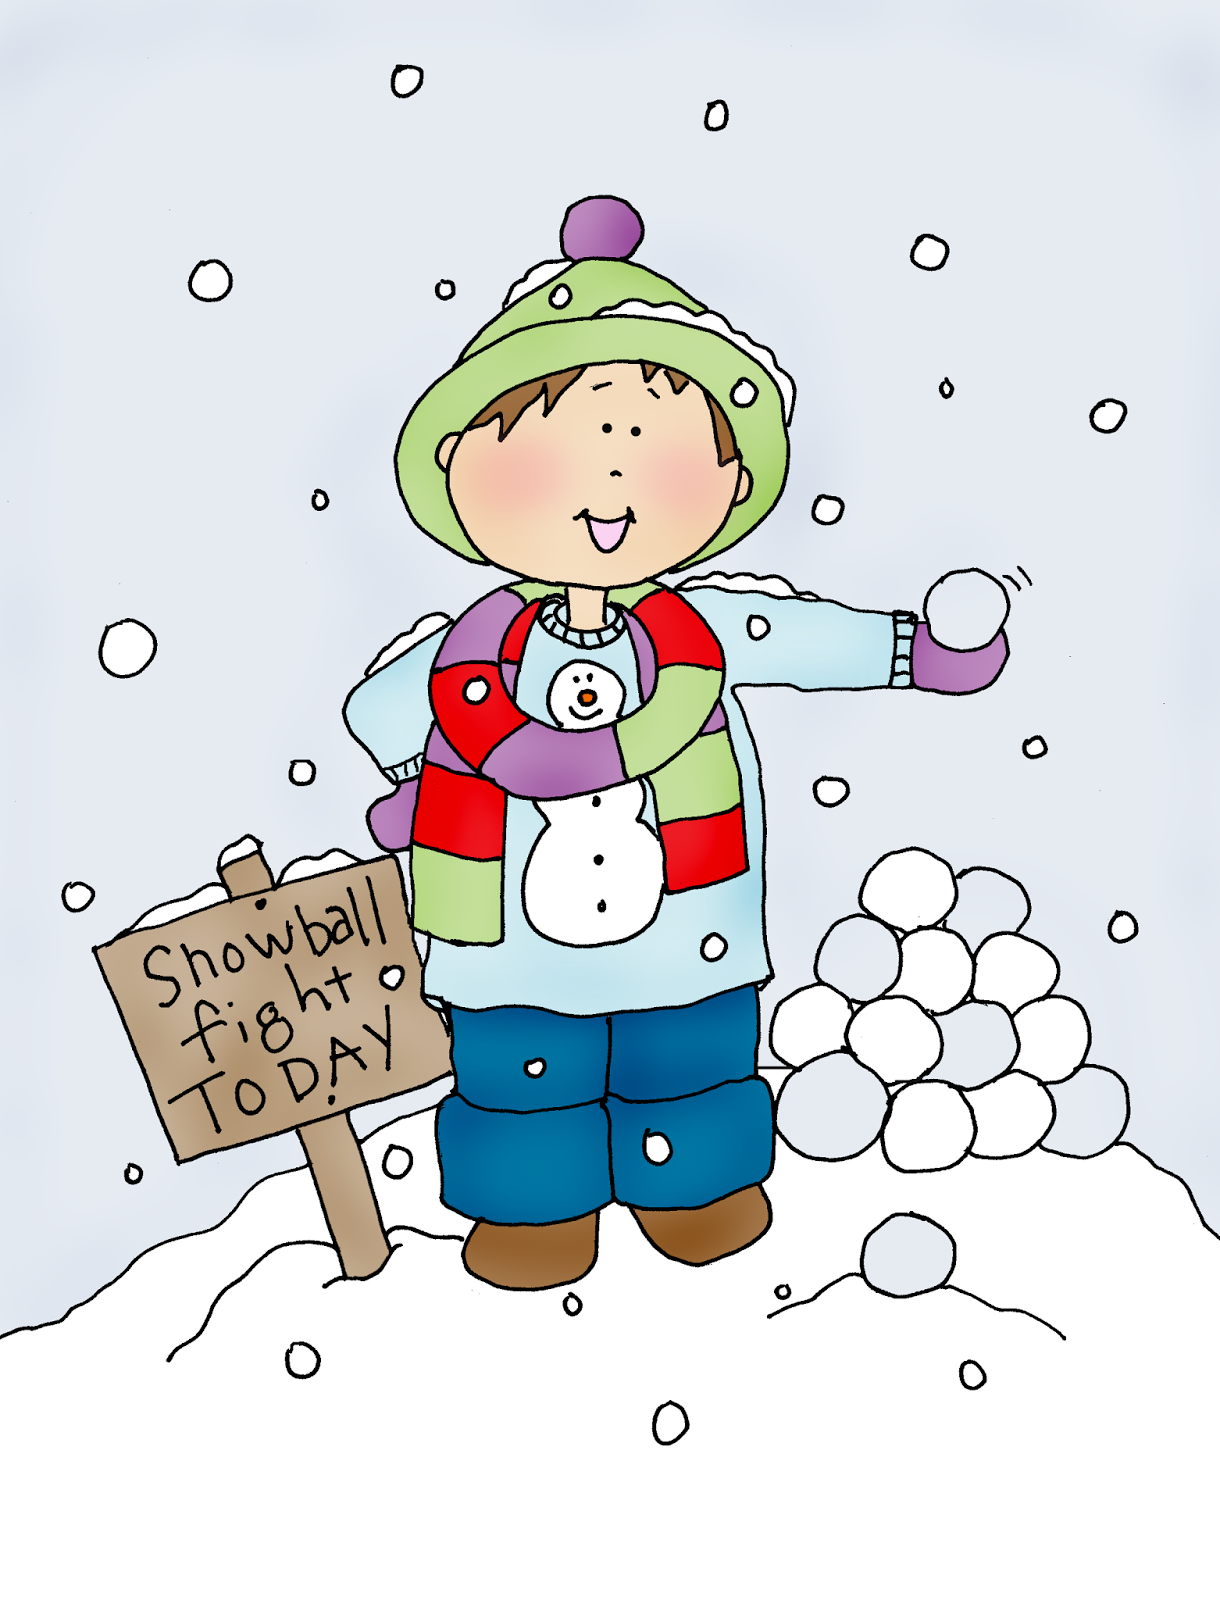 Clip Arts Related To : cartoon snowball fight clipart. 